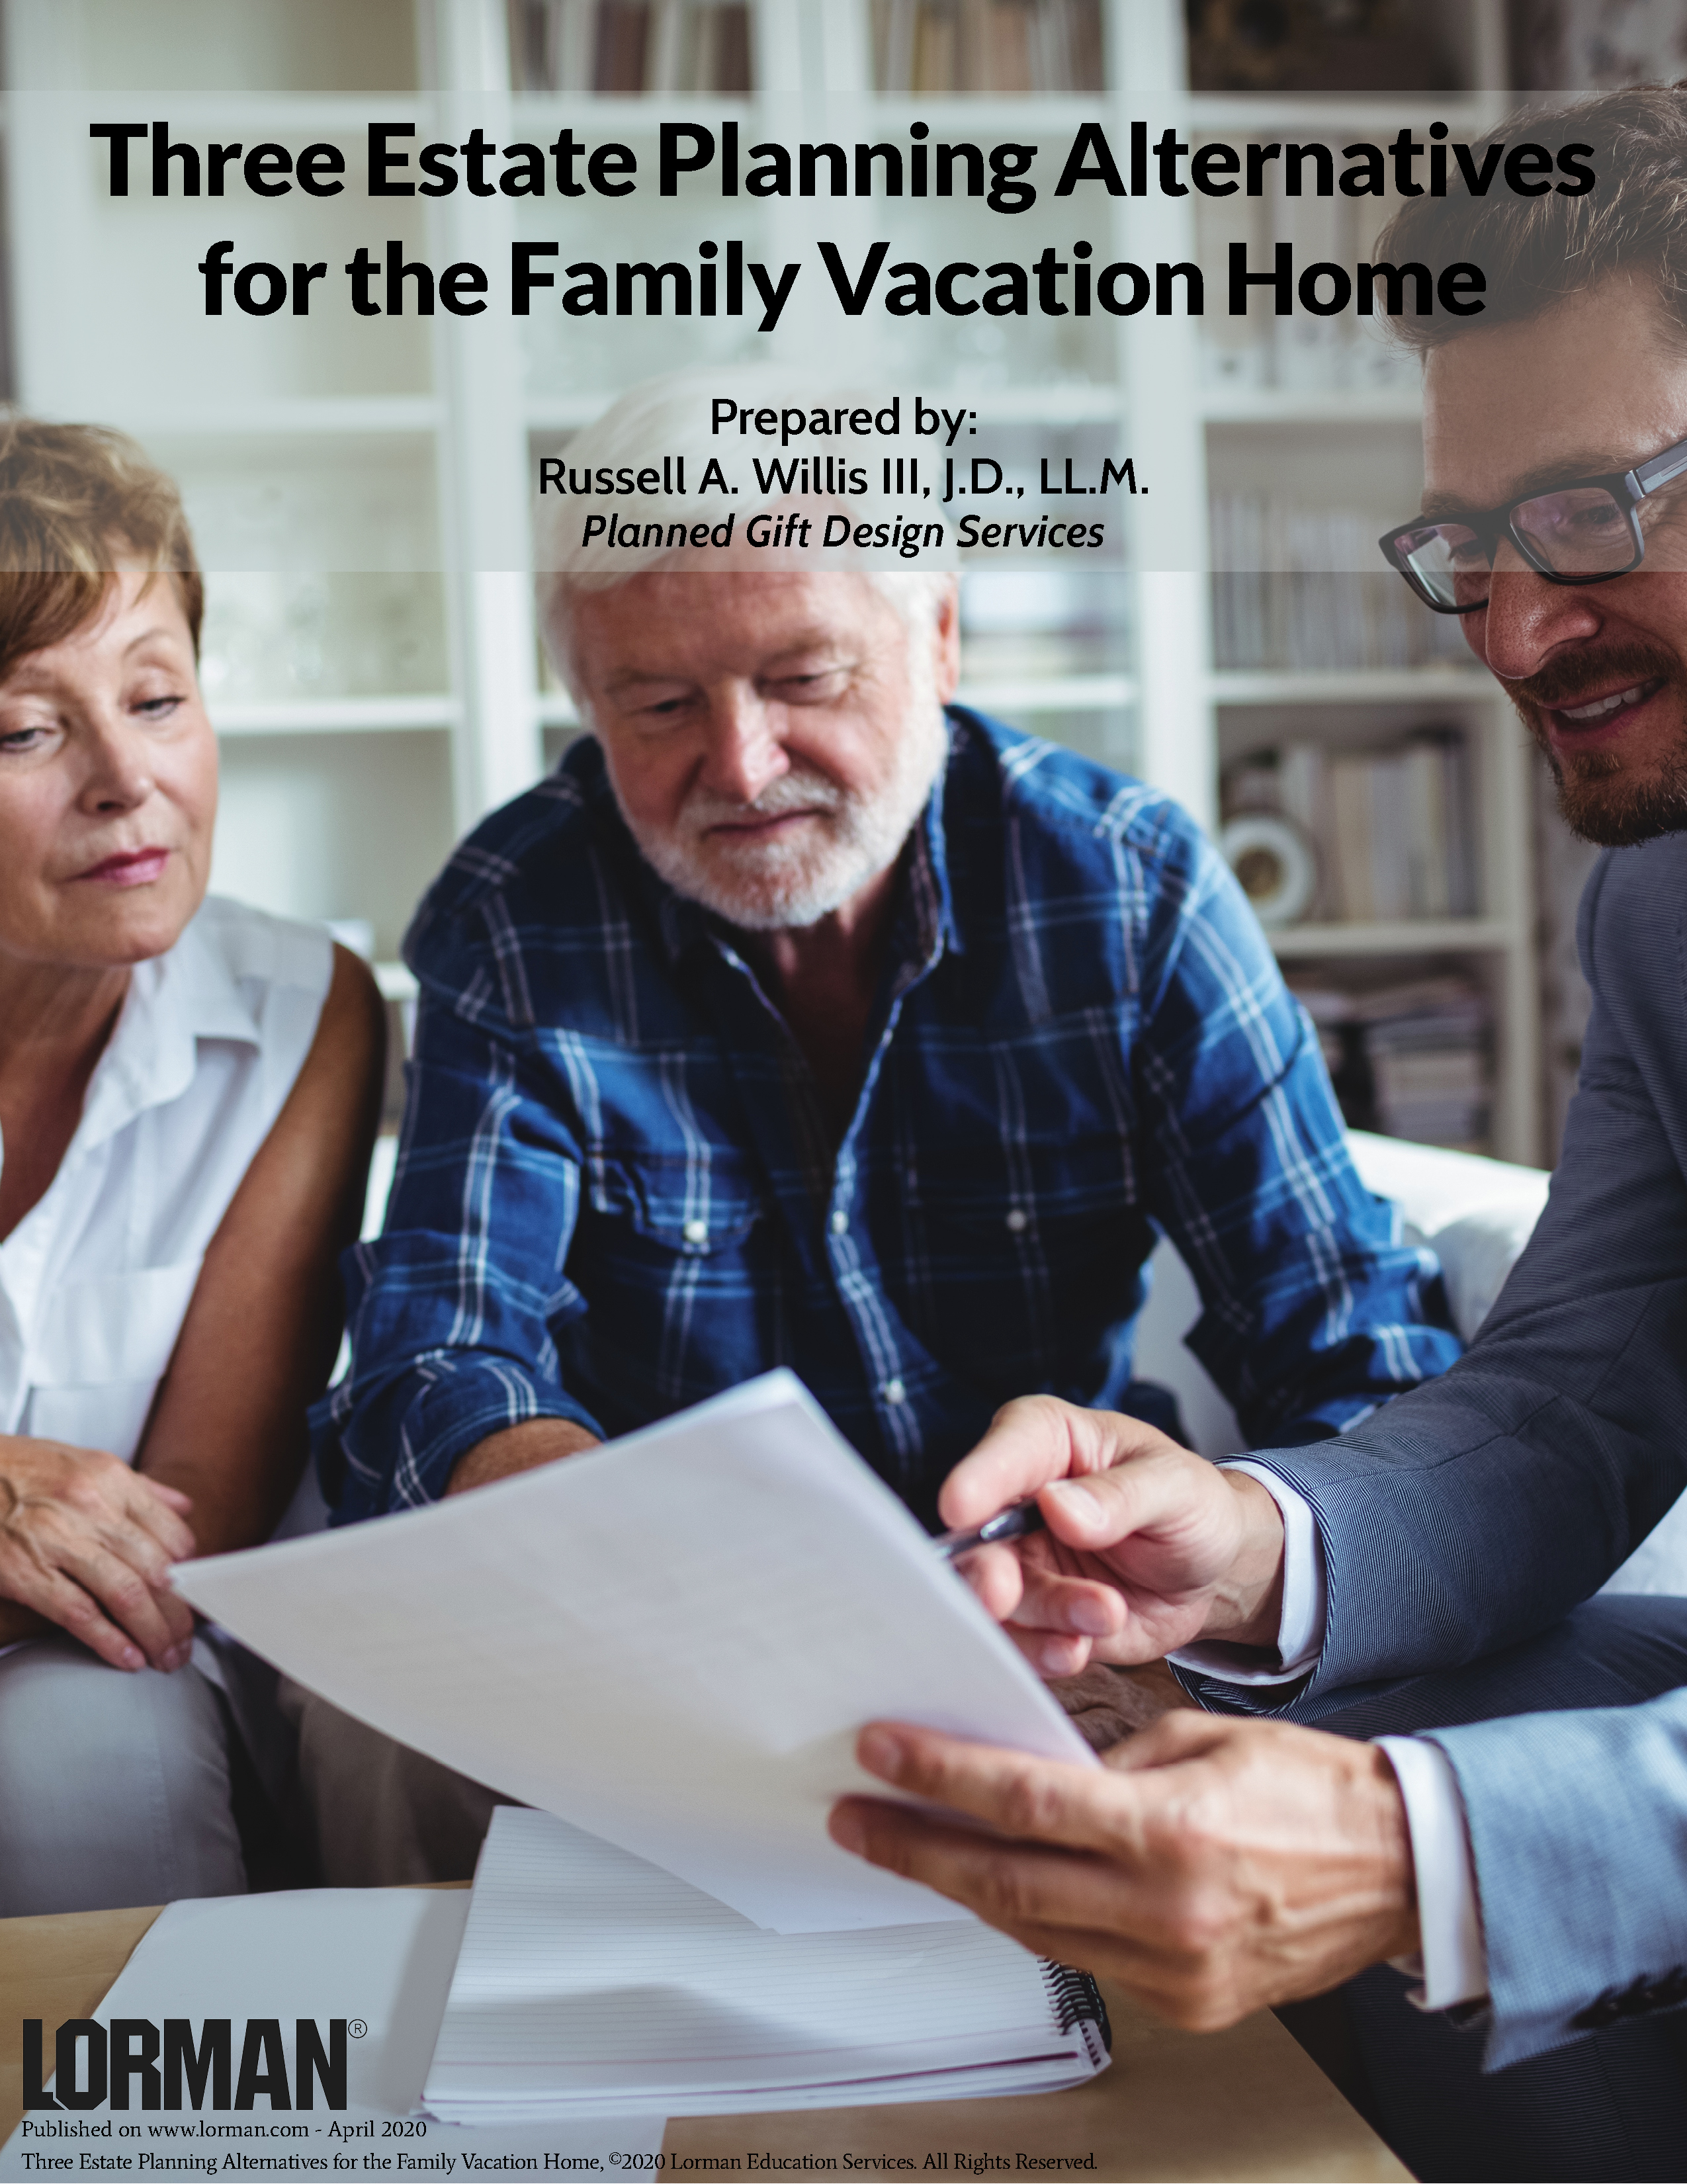 Three Estate Planning Alternatives for the Family Vacation Home